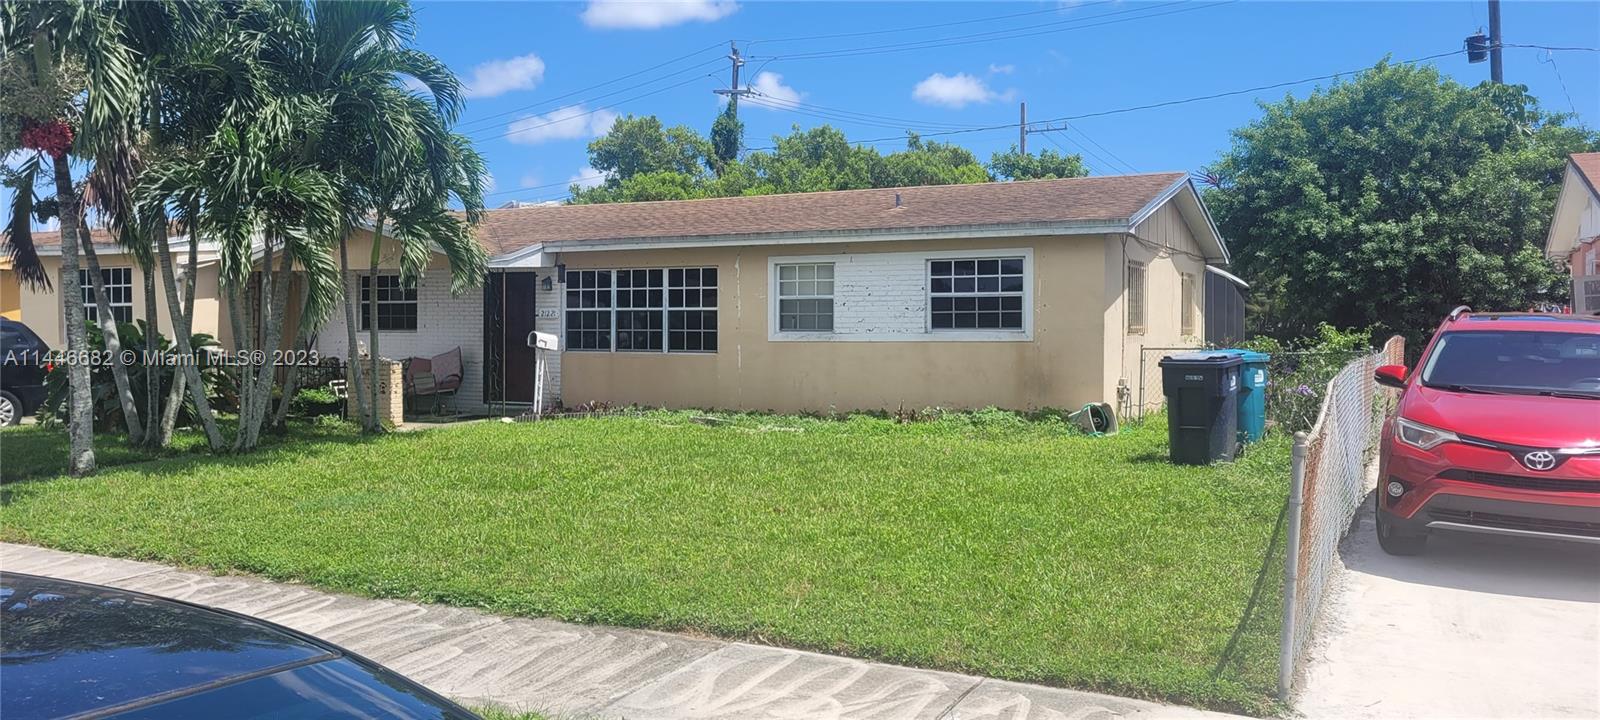 Photo 2 of 21221 NW 27th Ct in Miami Gardens - MLS A11446682